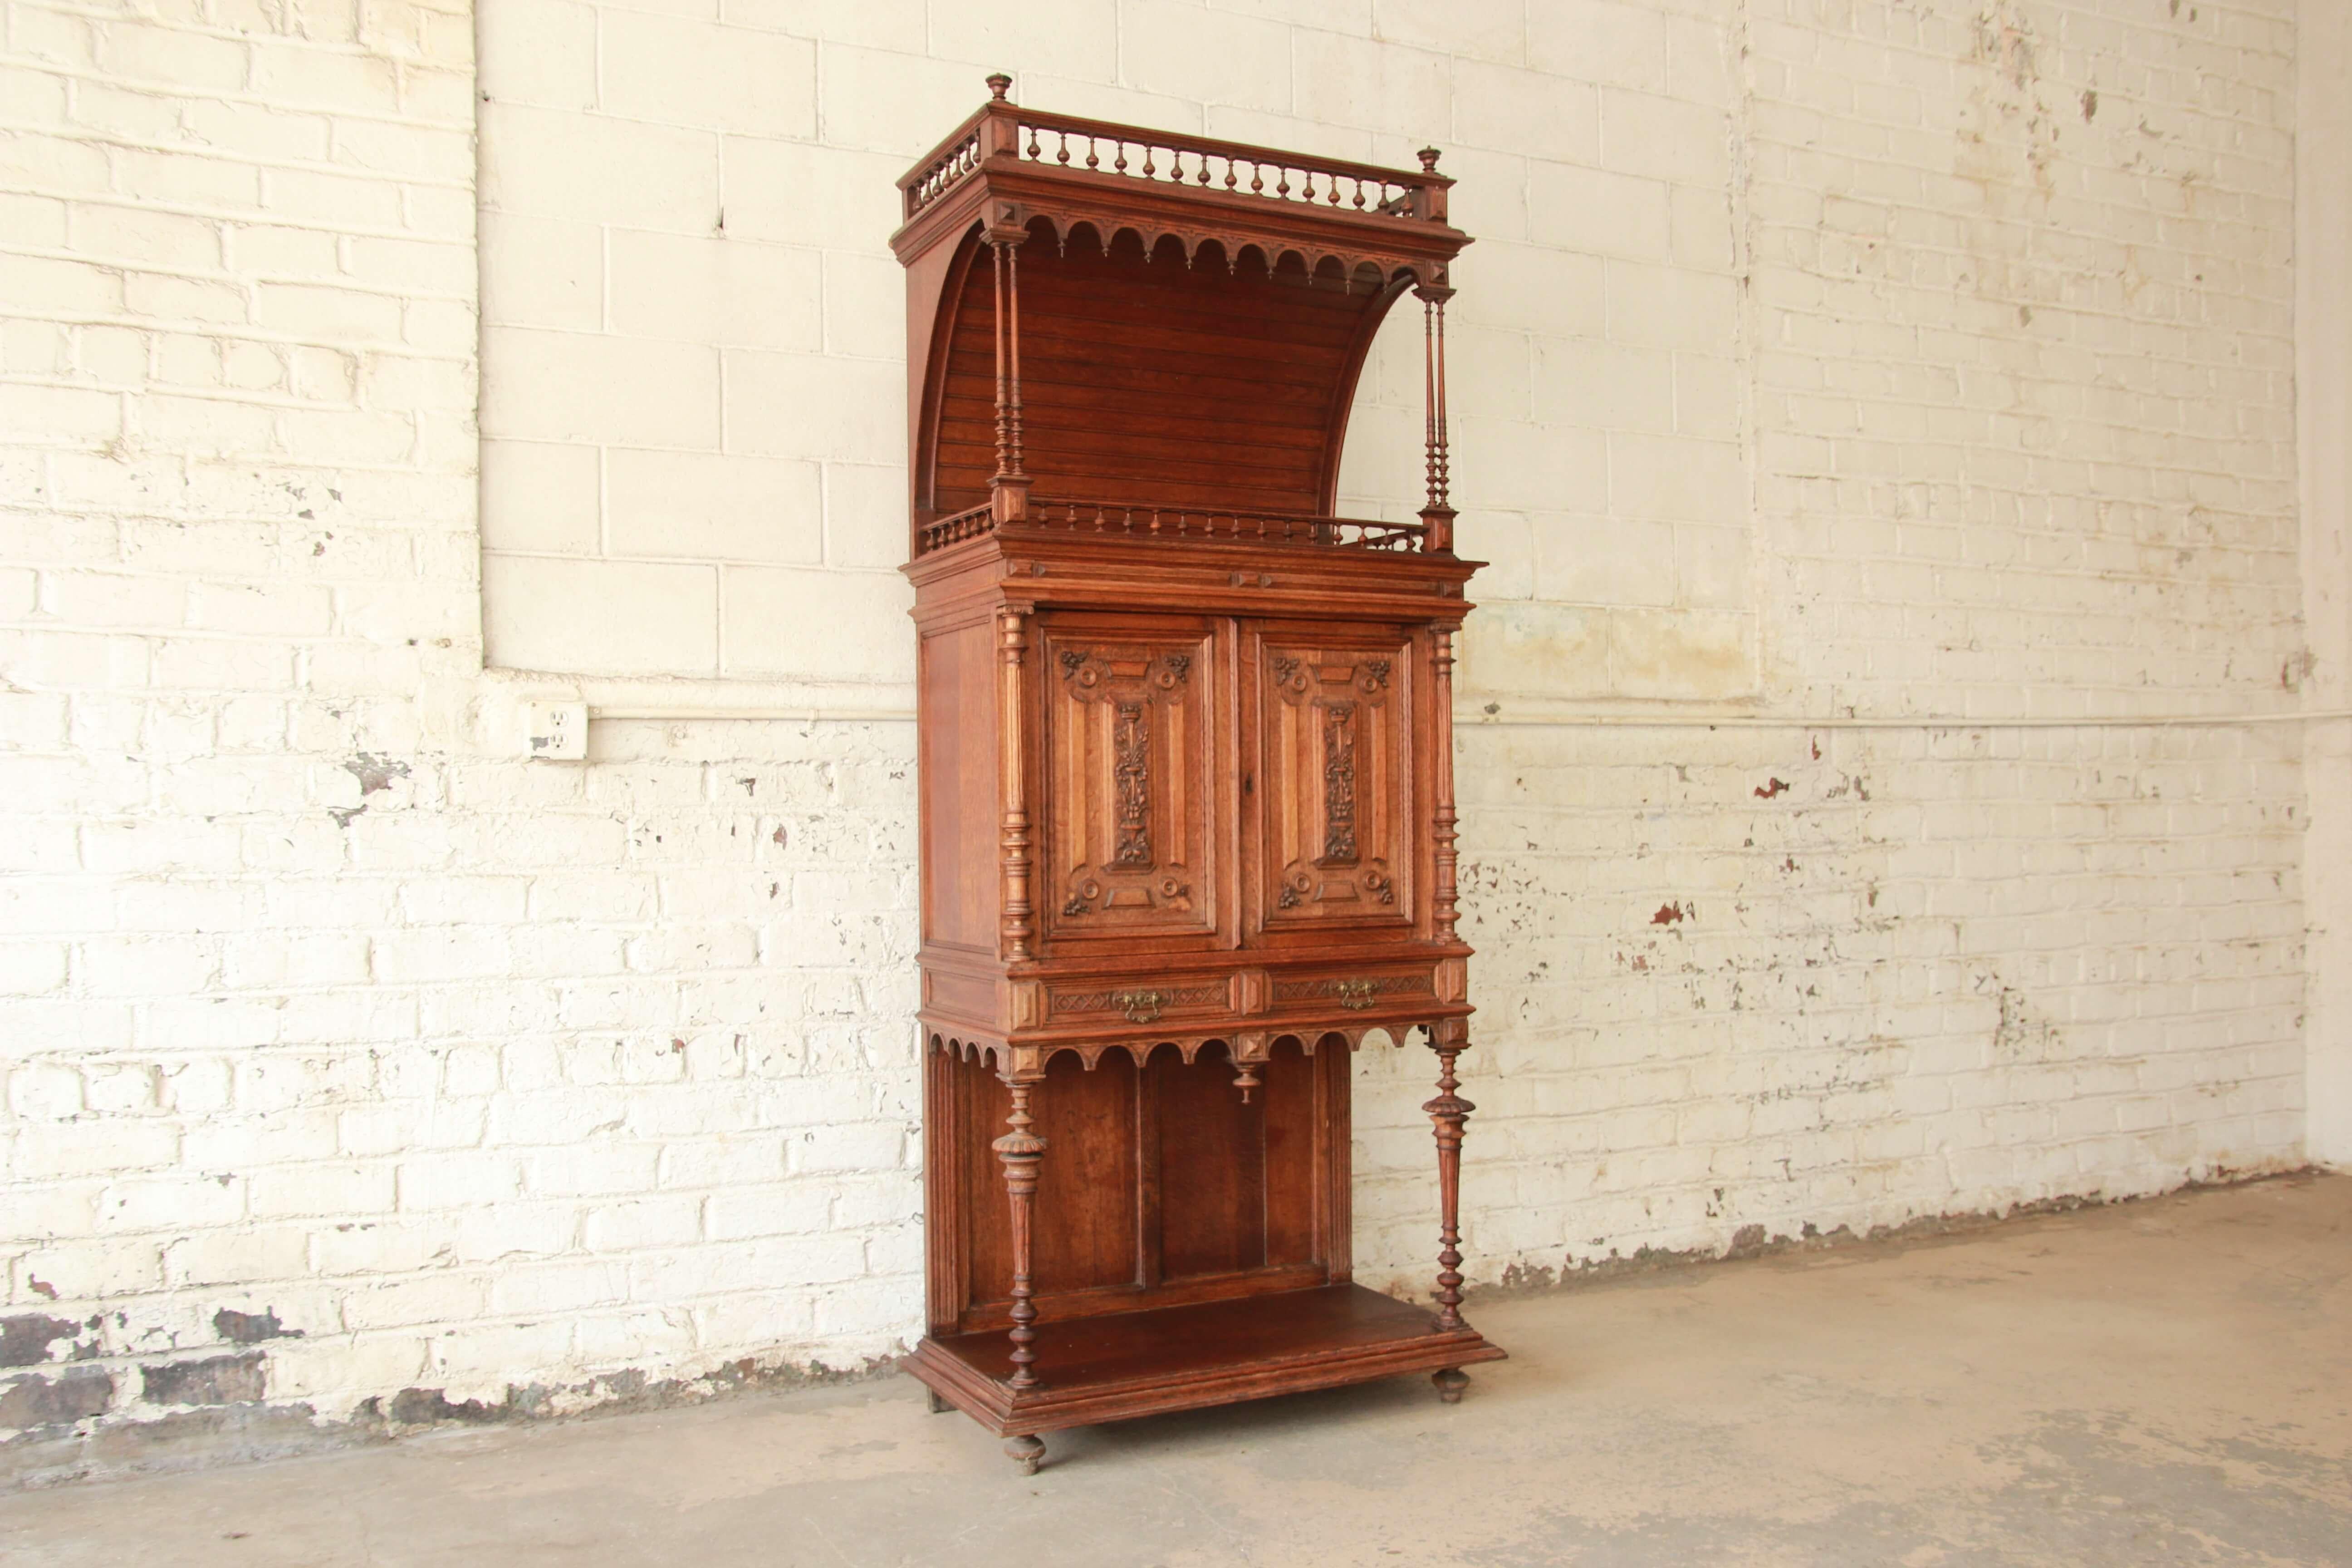 Offering a very nice antique carved oak tall French bar cabinet. This unique piece has beautiful carved details with multiple storage options for your liquor collection or books. Above is a unique shelf area with scrolled details and elegant French